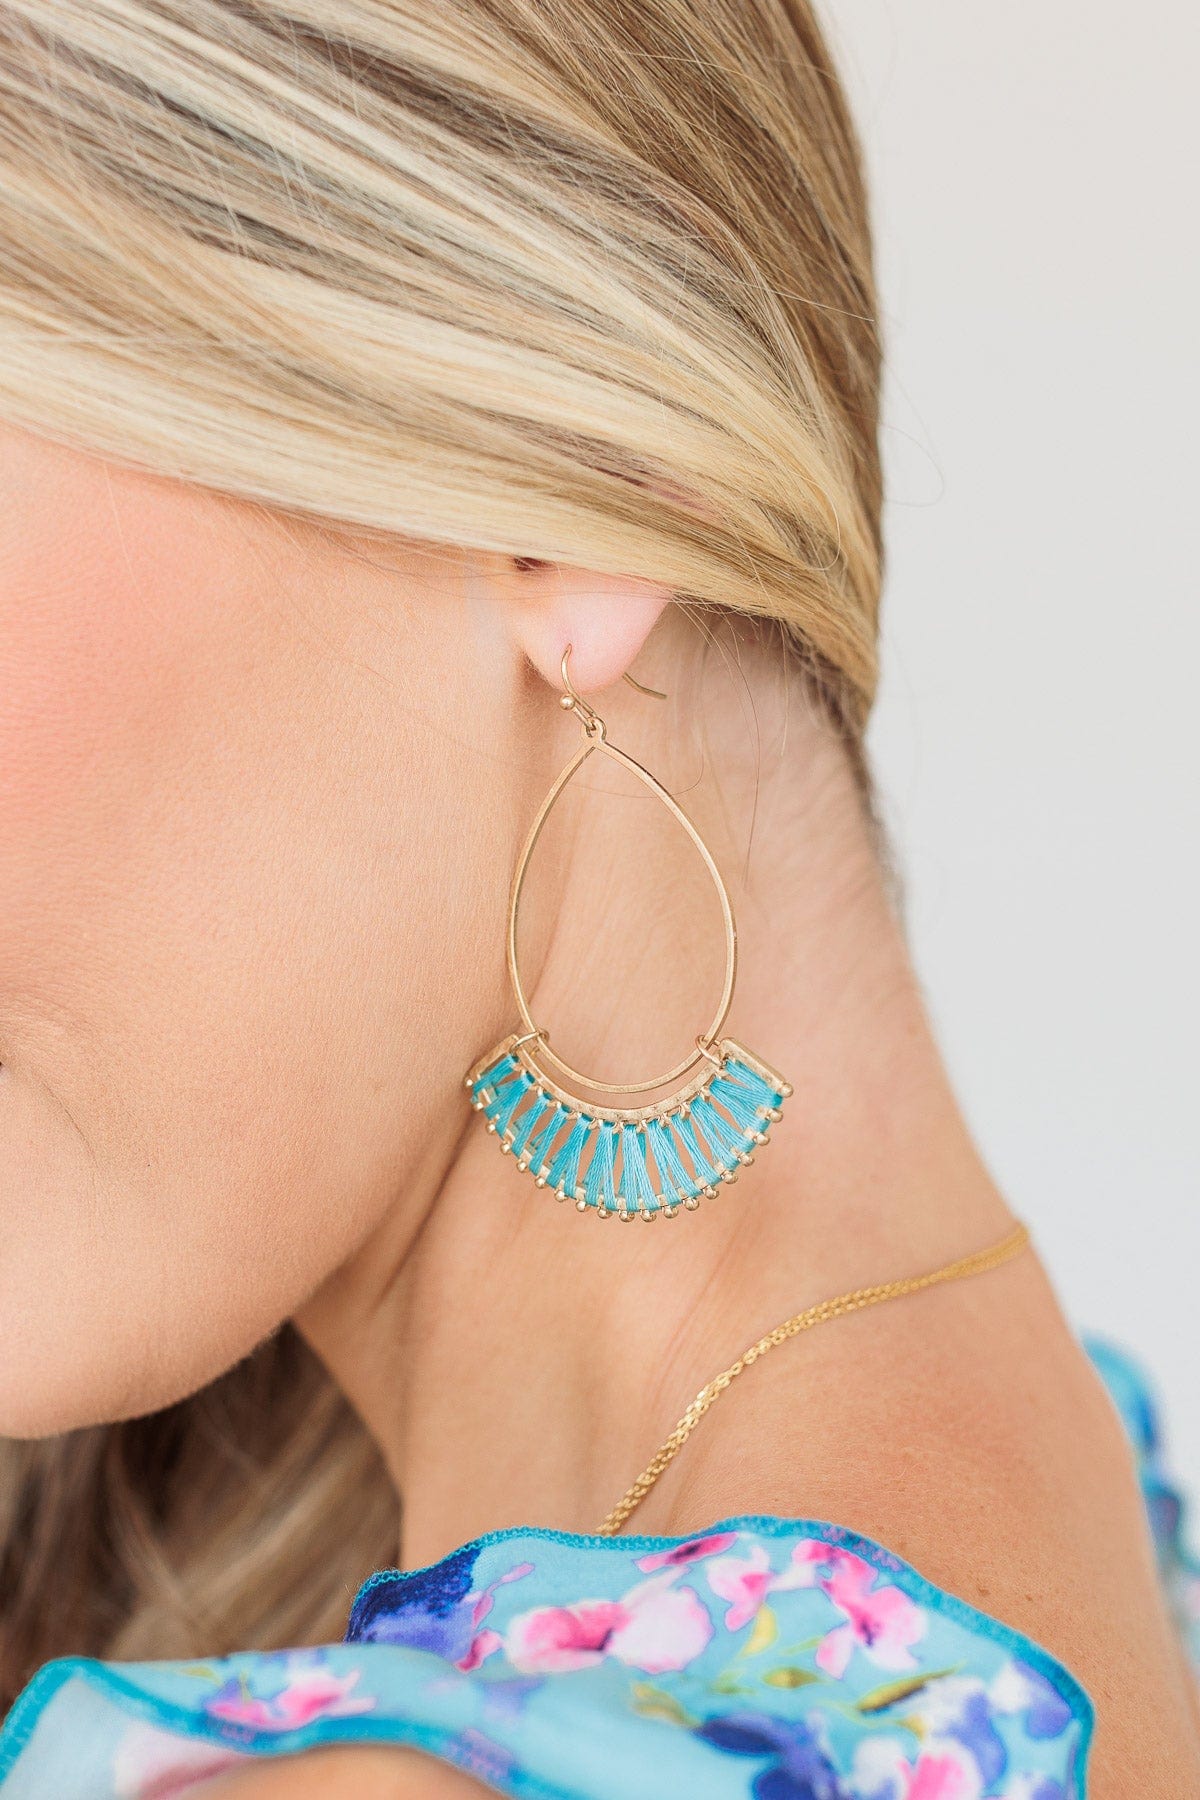 Save The Drama Gold Dangle Earrings- Turquoise